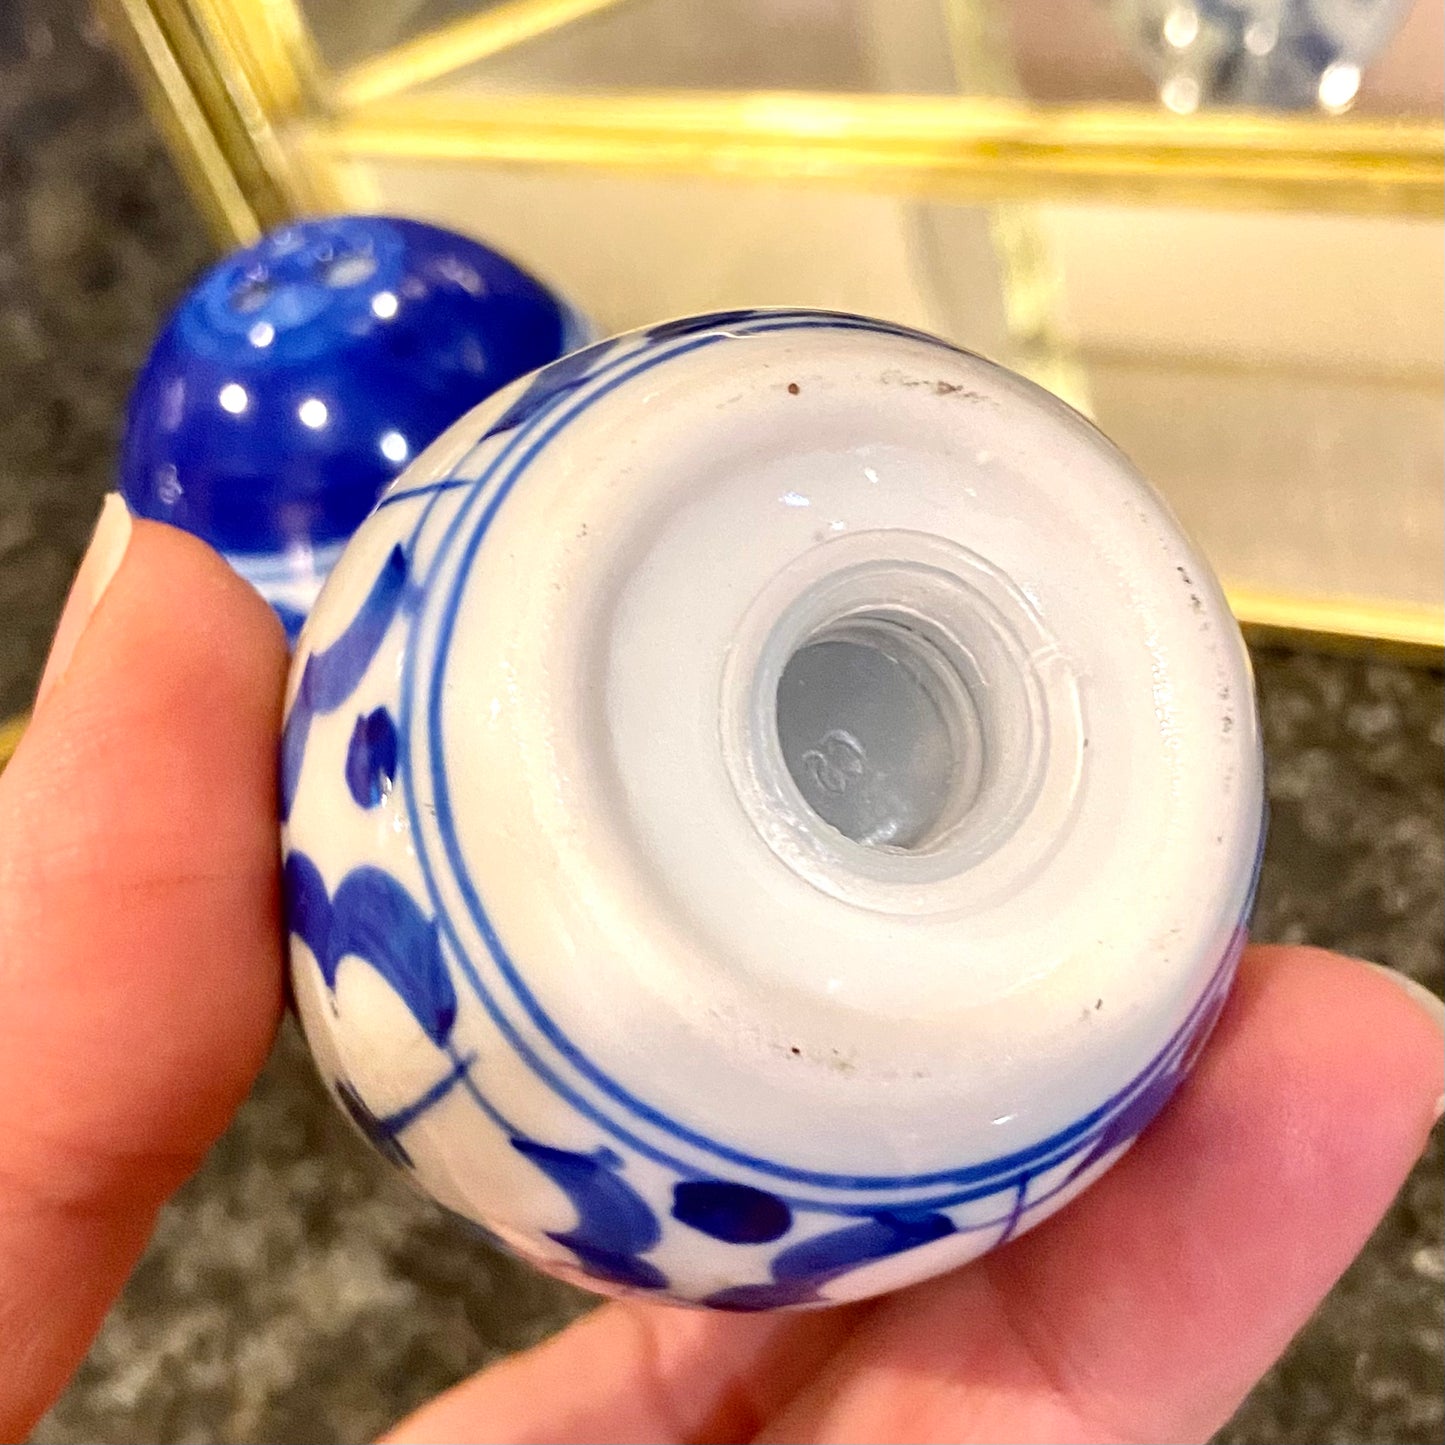 Charming pair of vintage blue and white salt & pepper shakers